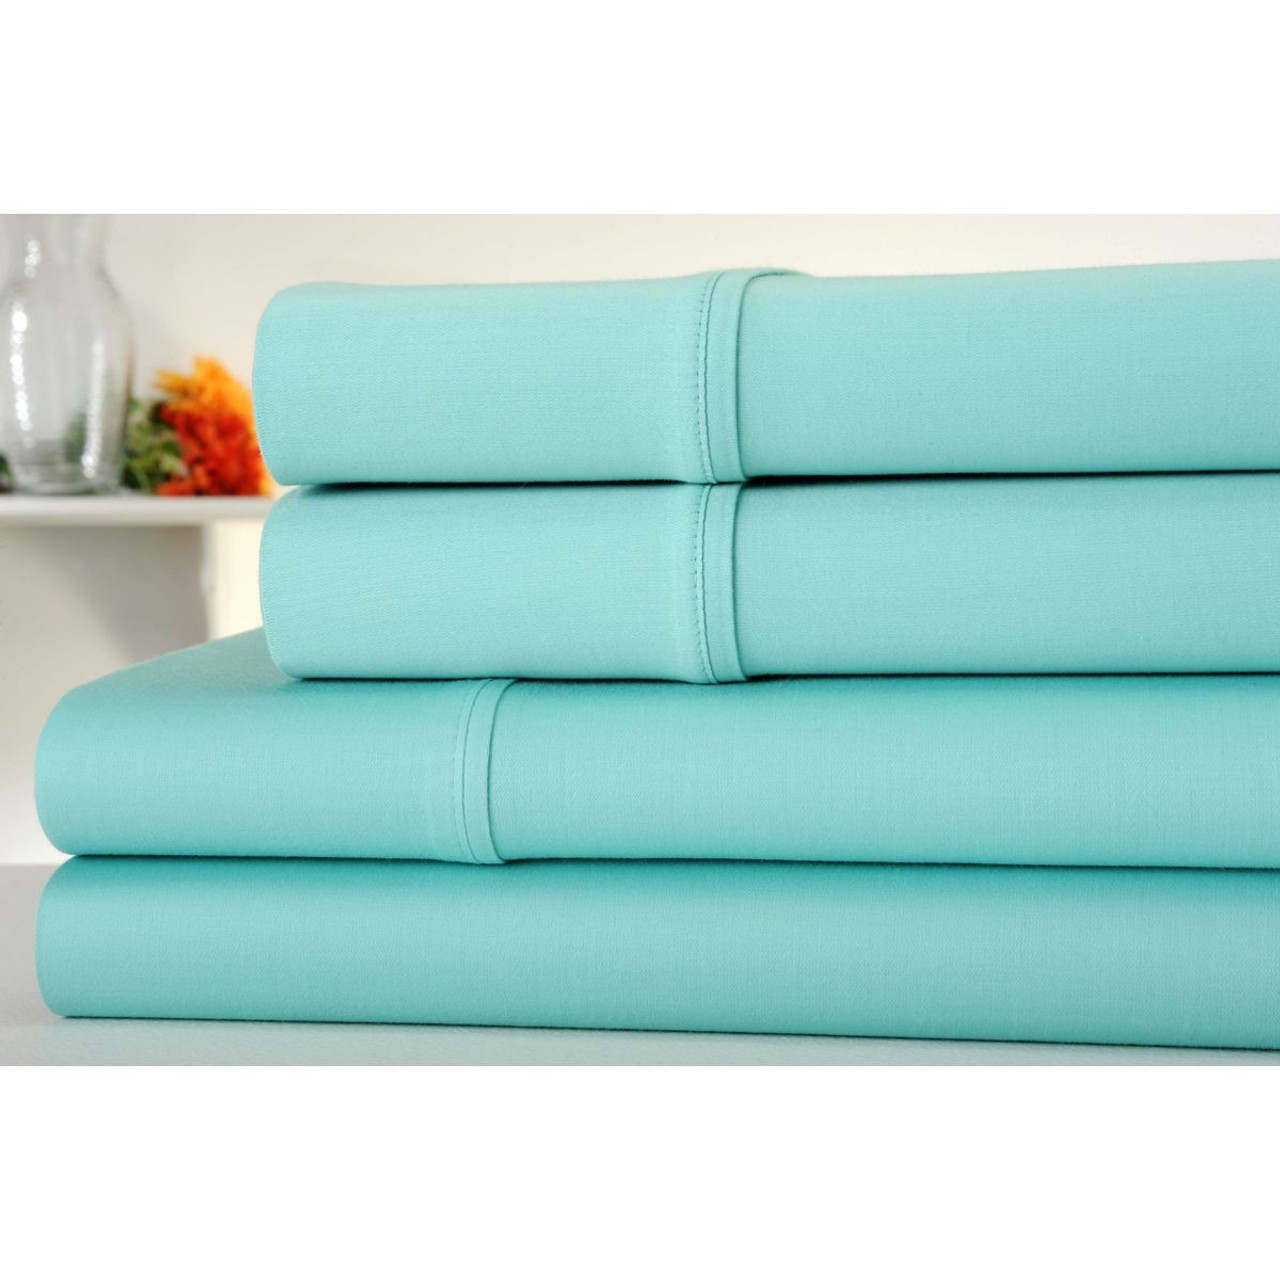 1,000TC Egyptian Cotton Sheet Set by Luxury Home™ product image